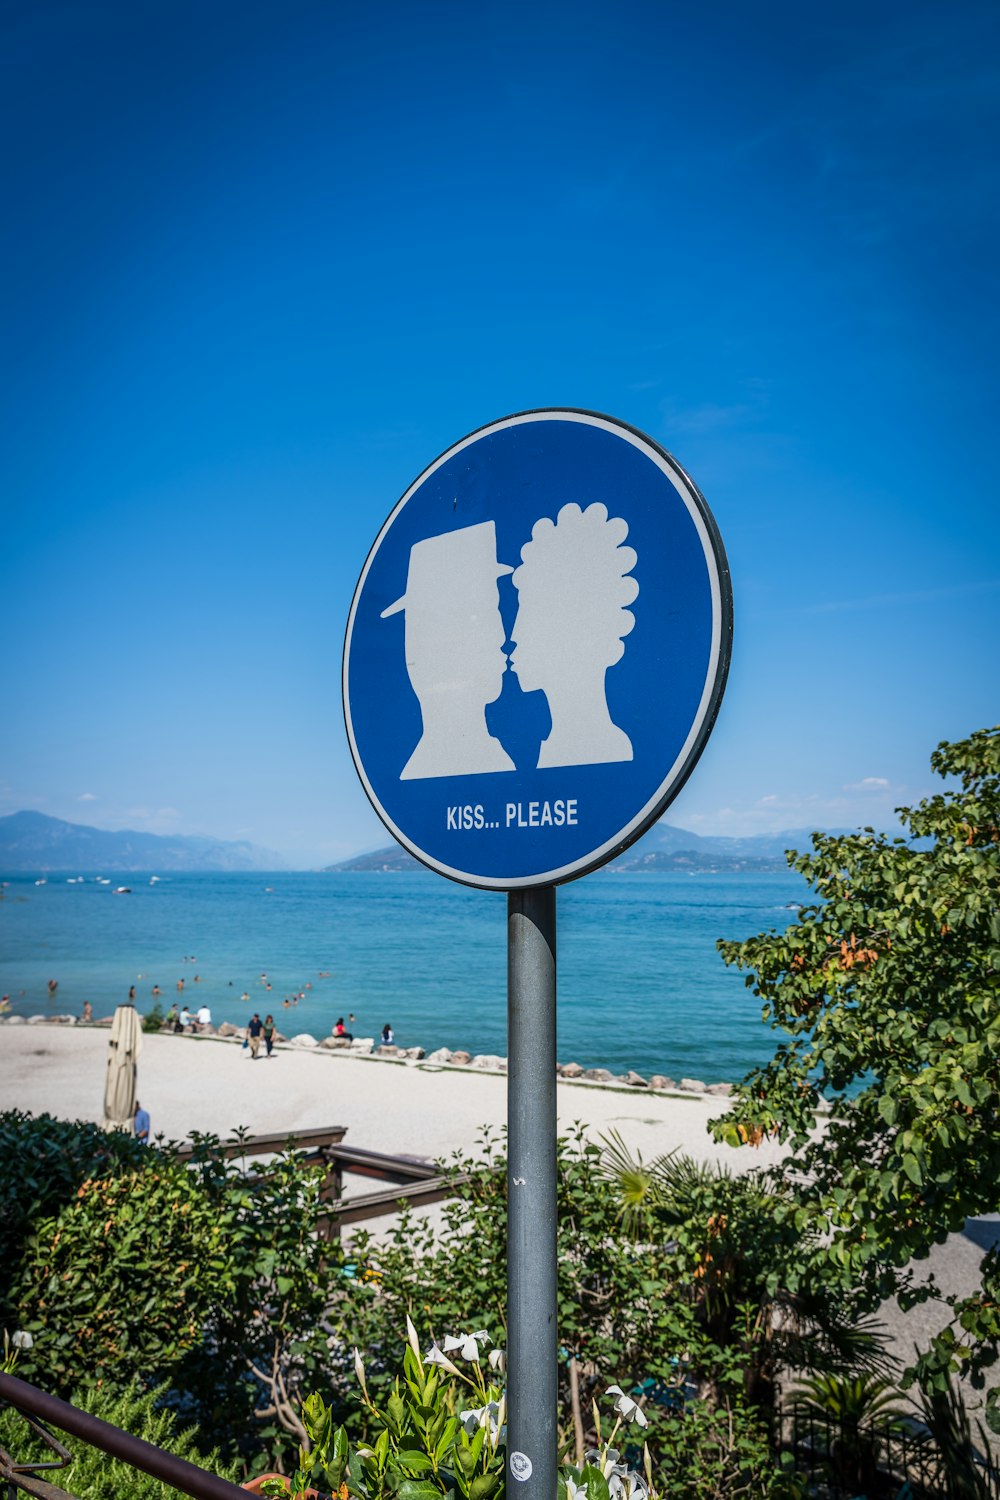 a sign on a pole with a beach and water in the background